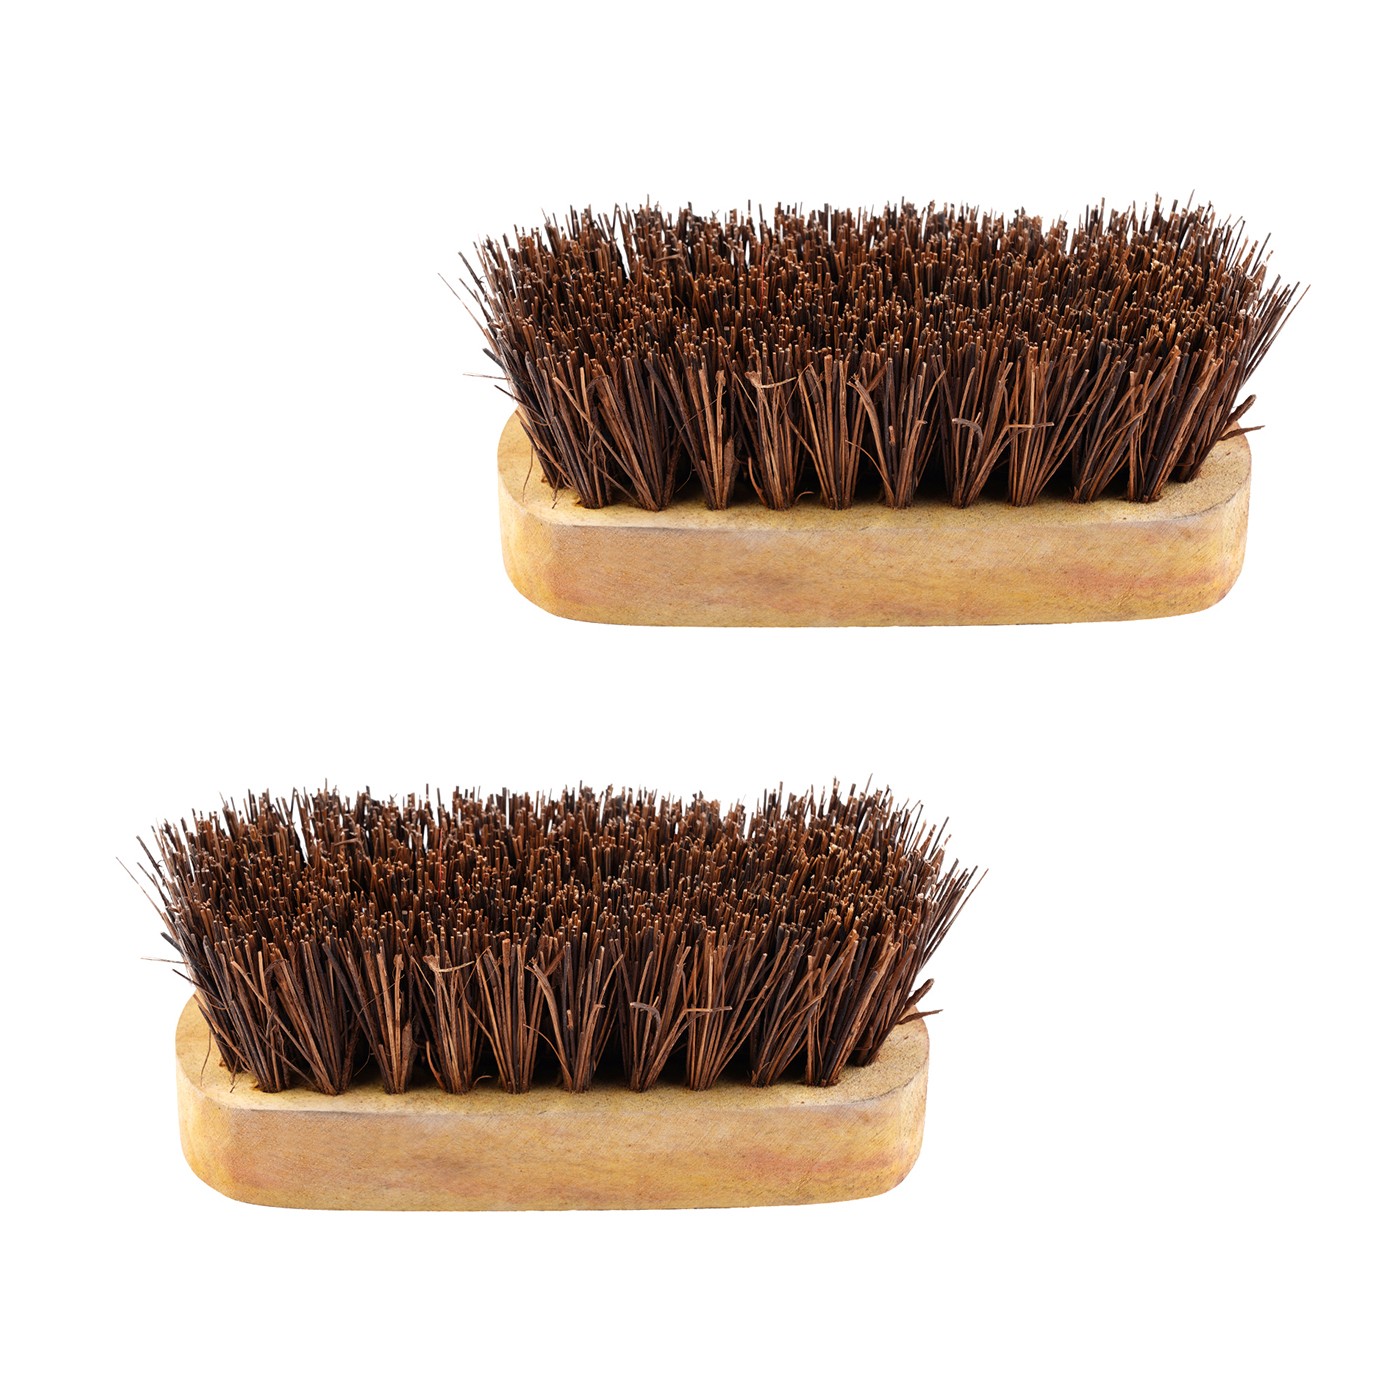 Multipurpose Strong Coir Washing Brush - Eco-Friendly Cleaning for Bathroom, Kitchen, Car Wheels, Home, Outdoor Spaces & Various Surfaces"-6 inch oval ( pack of 2 )